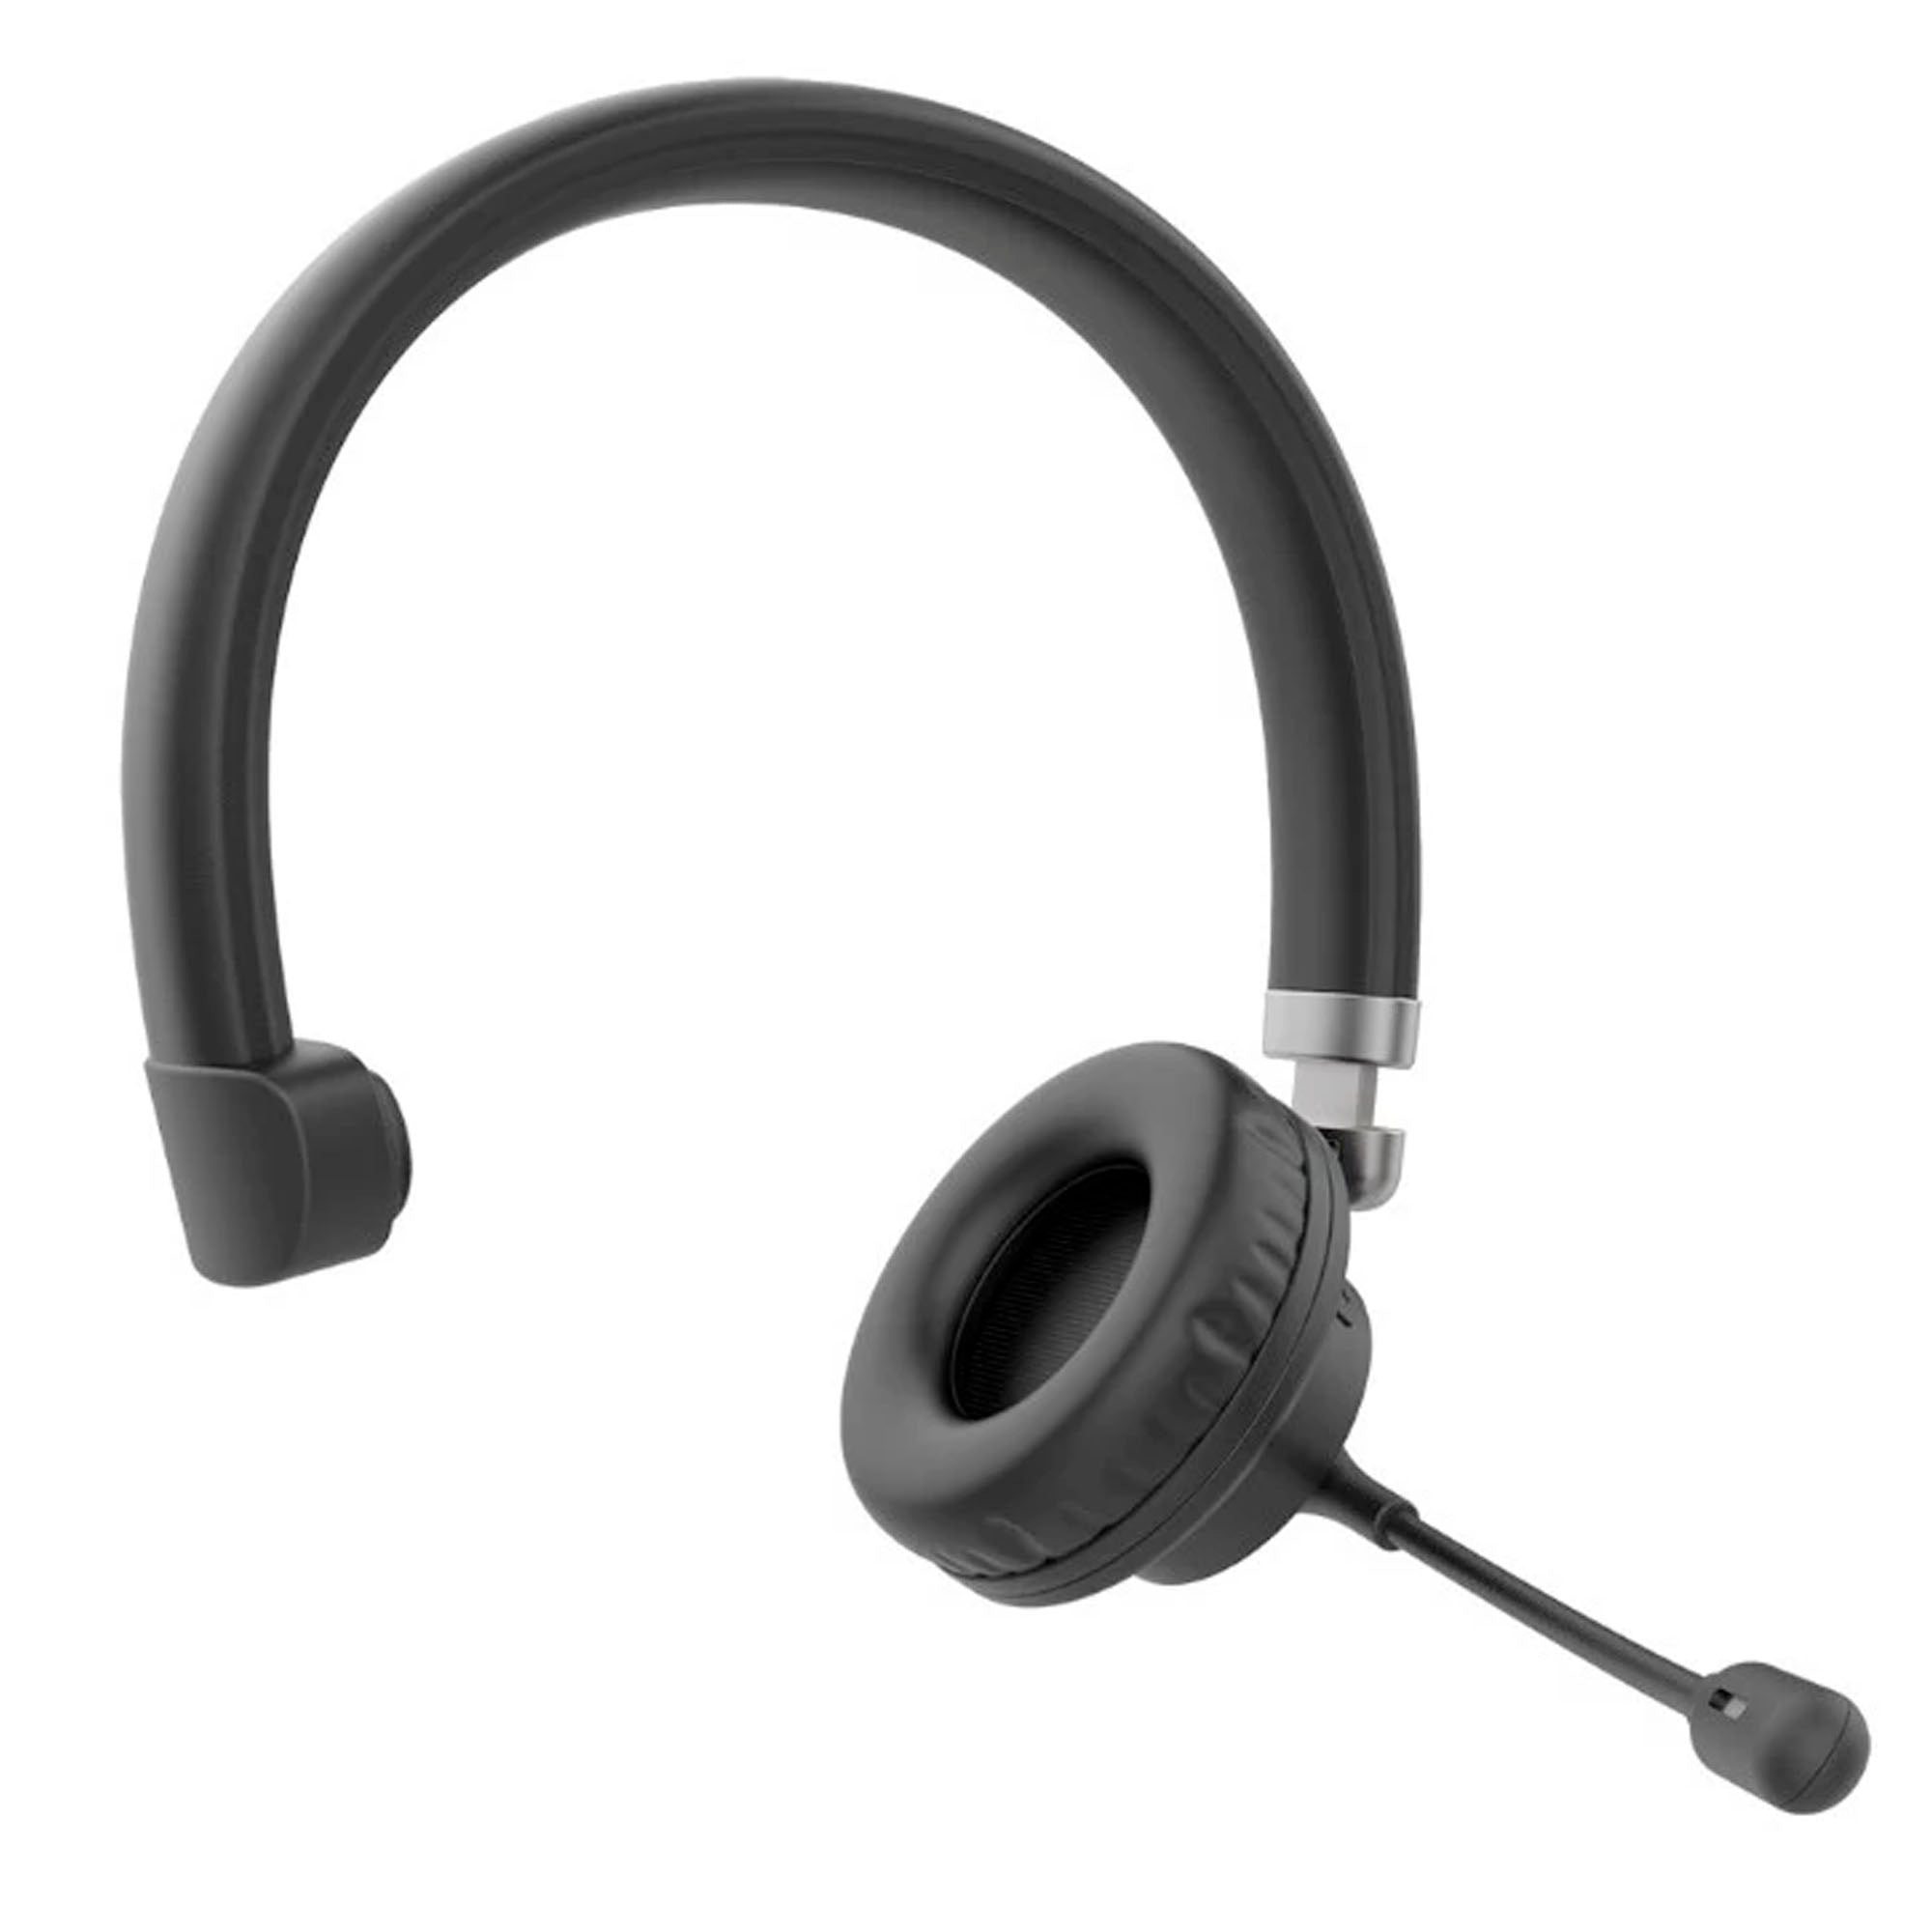 Trucker Bluetooth Headset with Microphone, 40 Hrs Wireless Headset